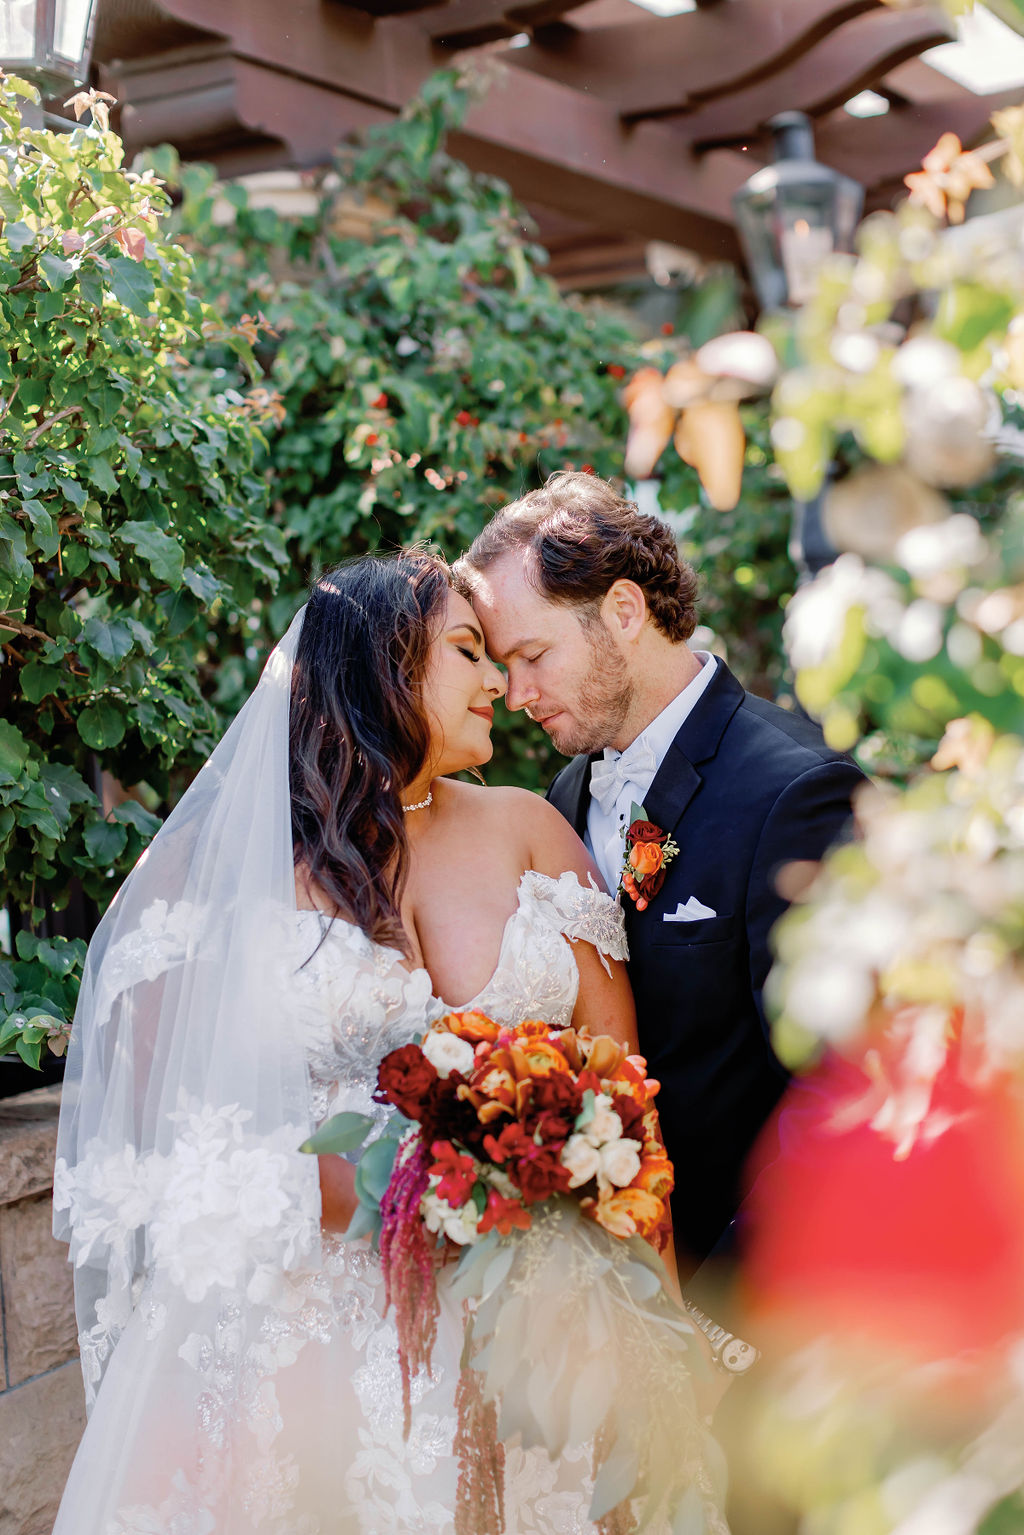 Bride and groom forehead to forehead for a photo at Mission Santa Barbara wedding | Photo by Sarah Block Photography